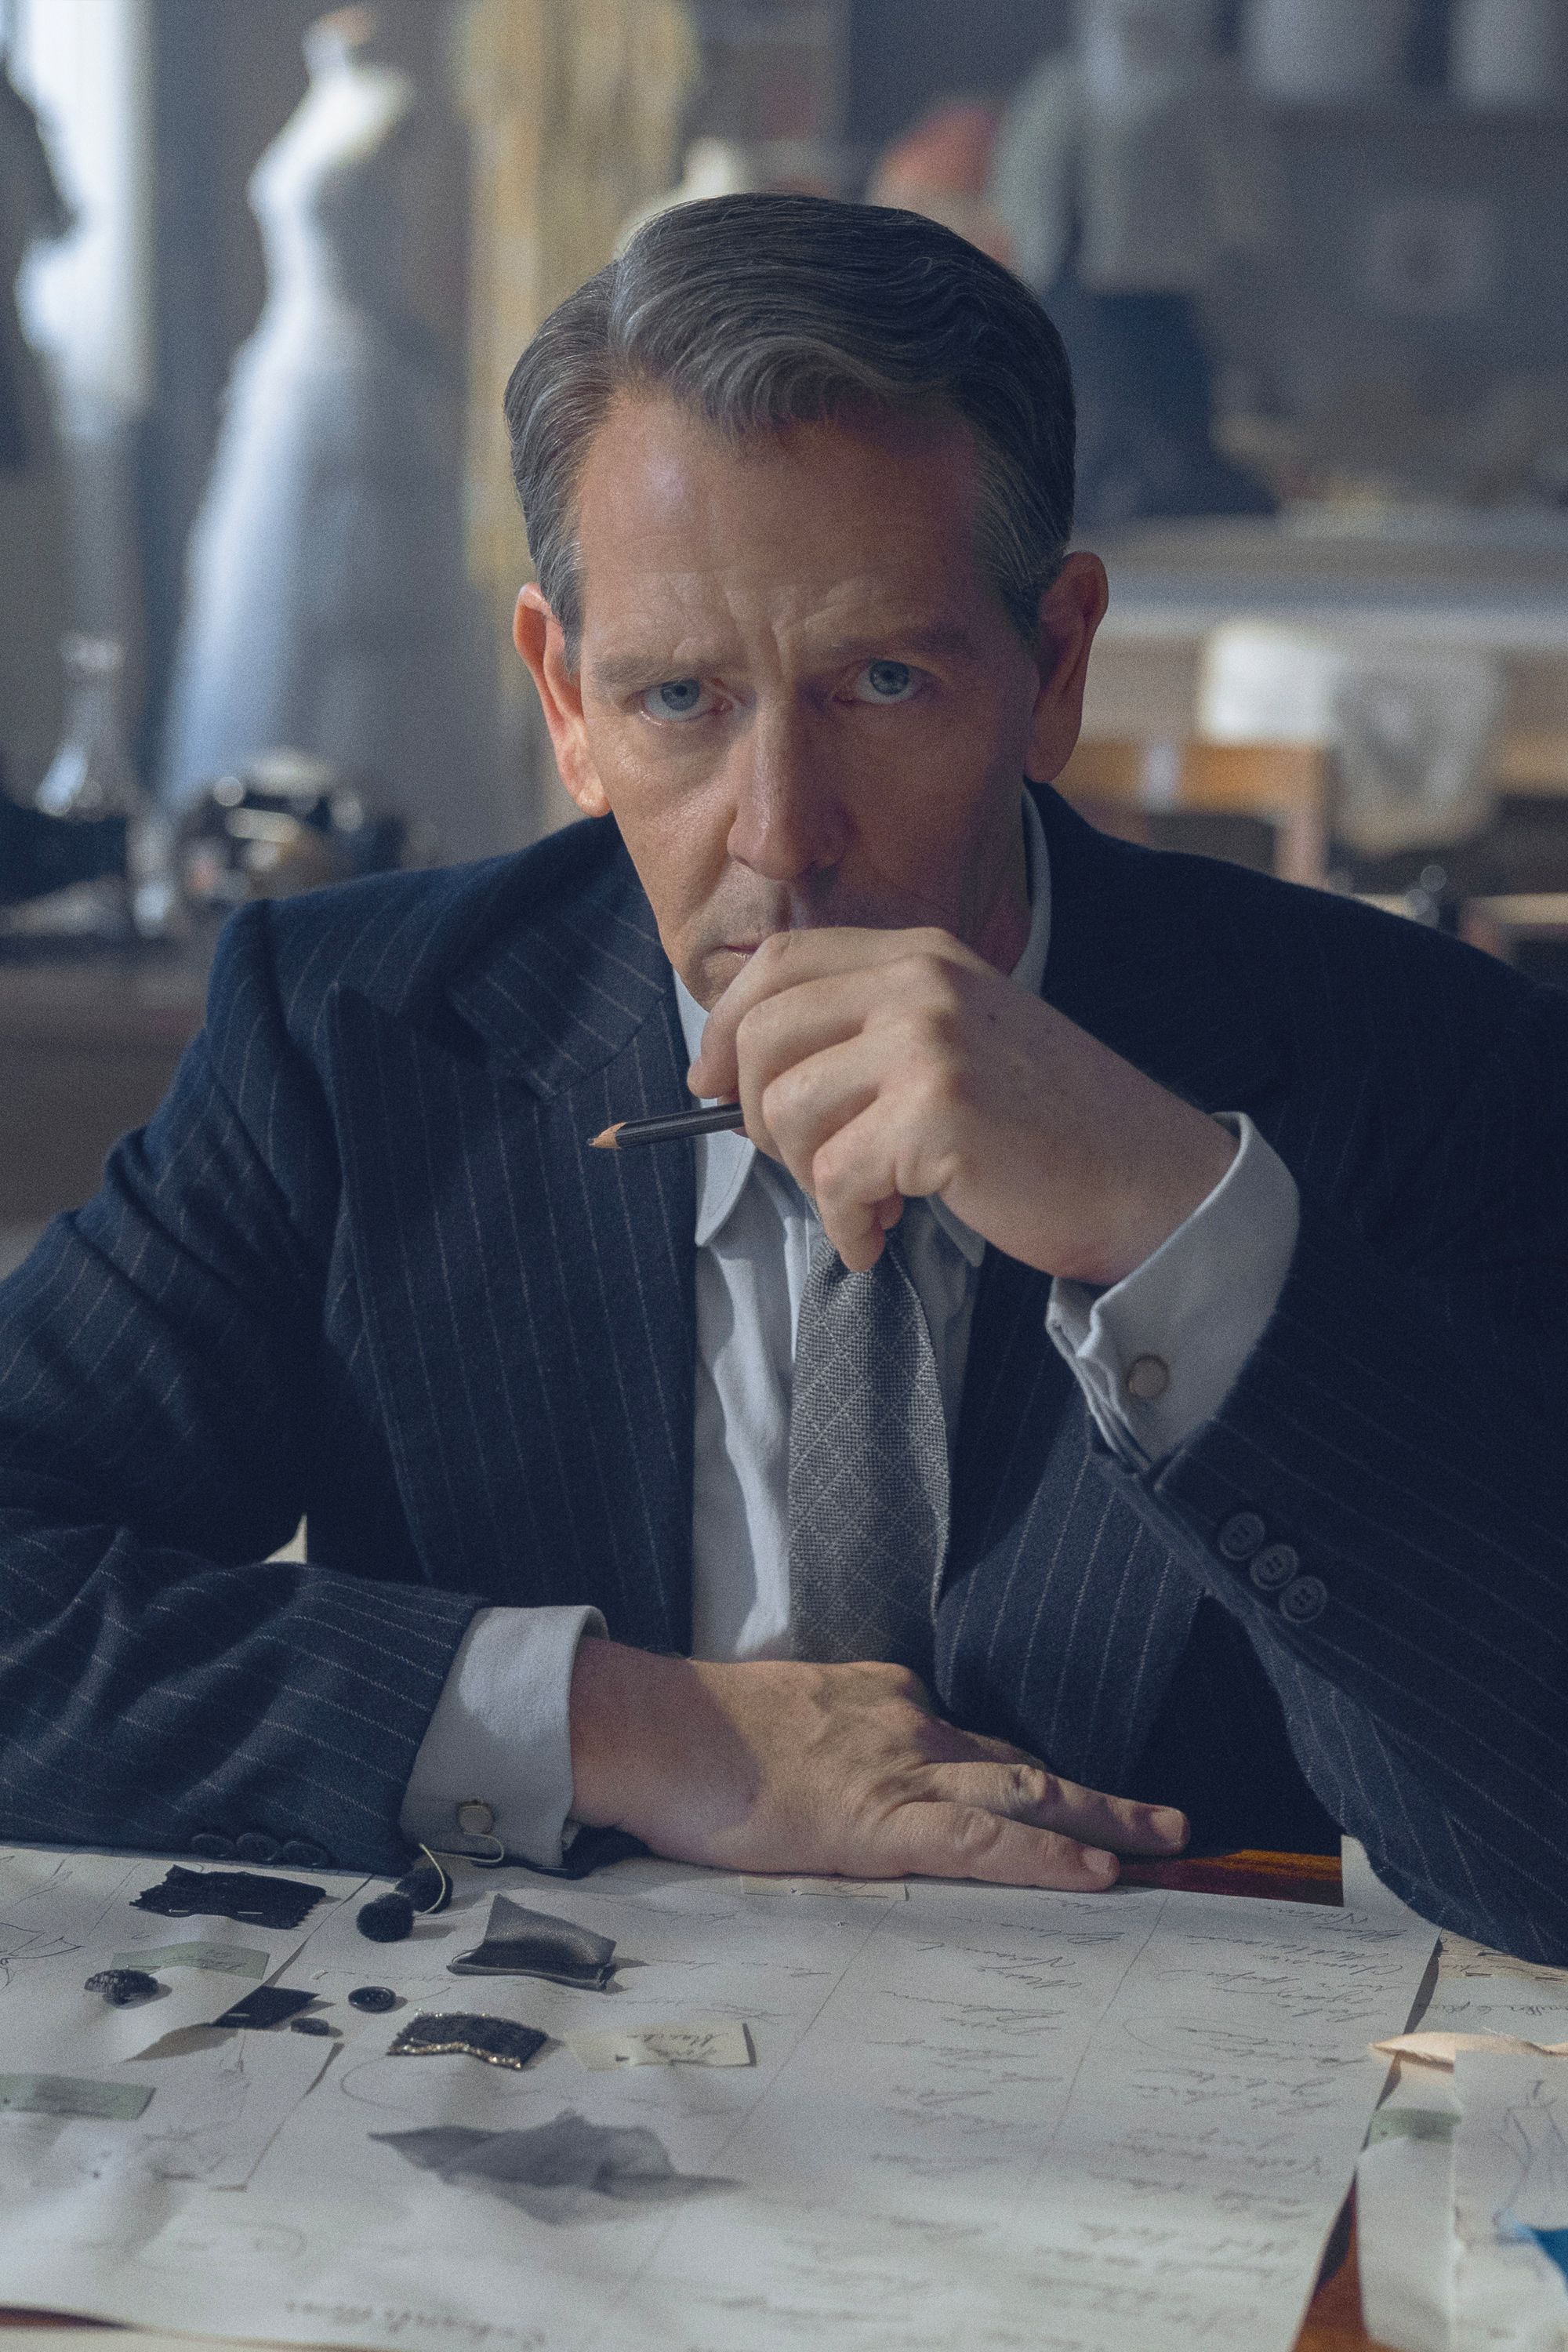 Ben Mendelsohn as Christian Dior Looking Over Fashion Papers in The New Look